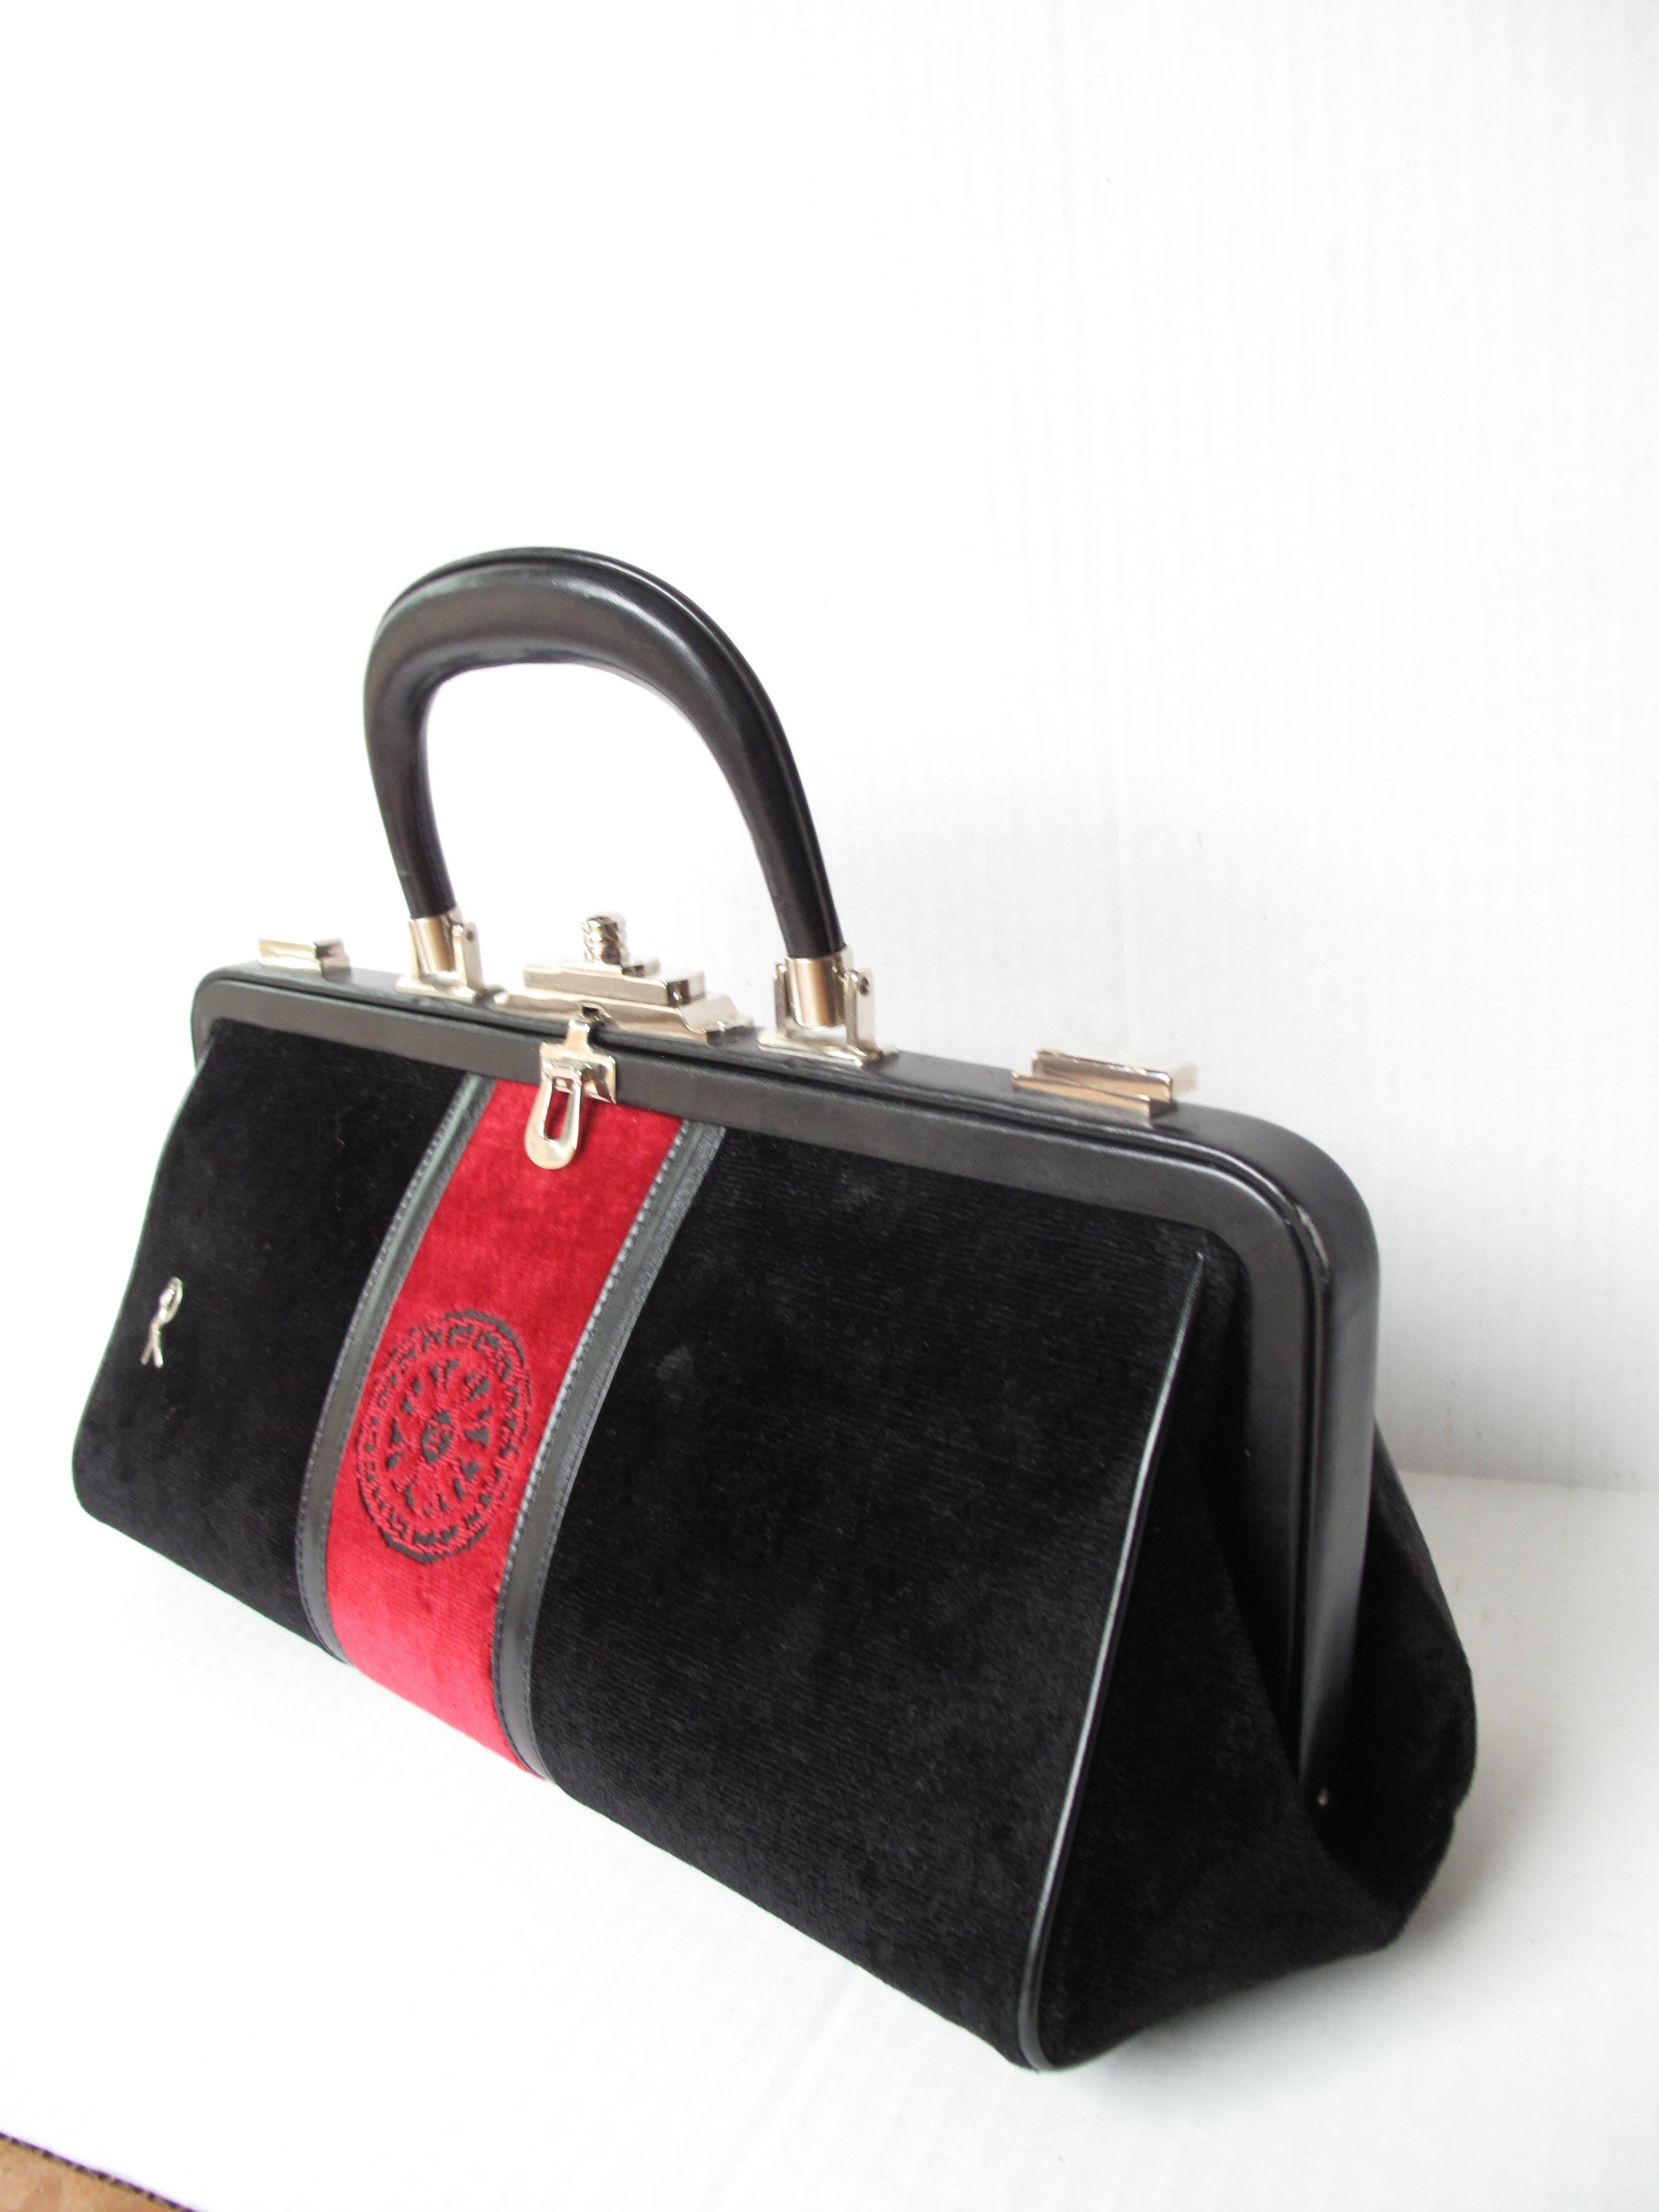 1978 Roberta di Camerino black and red velvet bag with leather trim.  Condition: Excellent, never used. 
 15 1/2